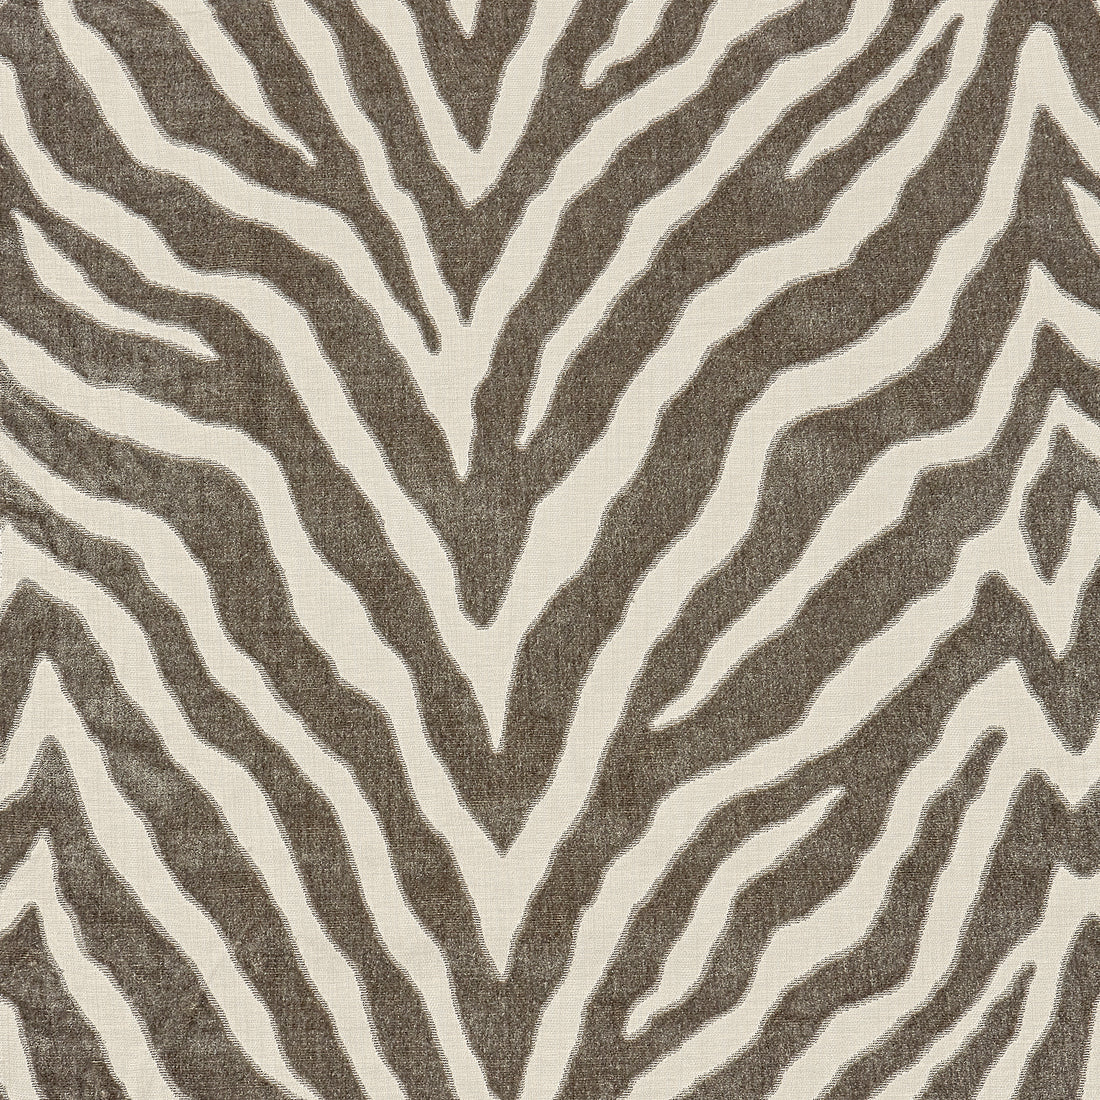 Etosha Velvet fabric in taupe color - pattern number W80405 - by Thibaut in the Woven Resource Vol 10 Menagerie collection